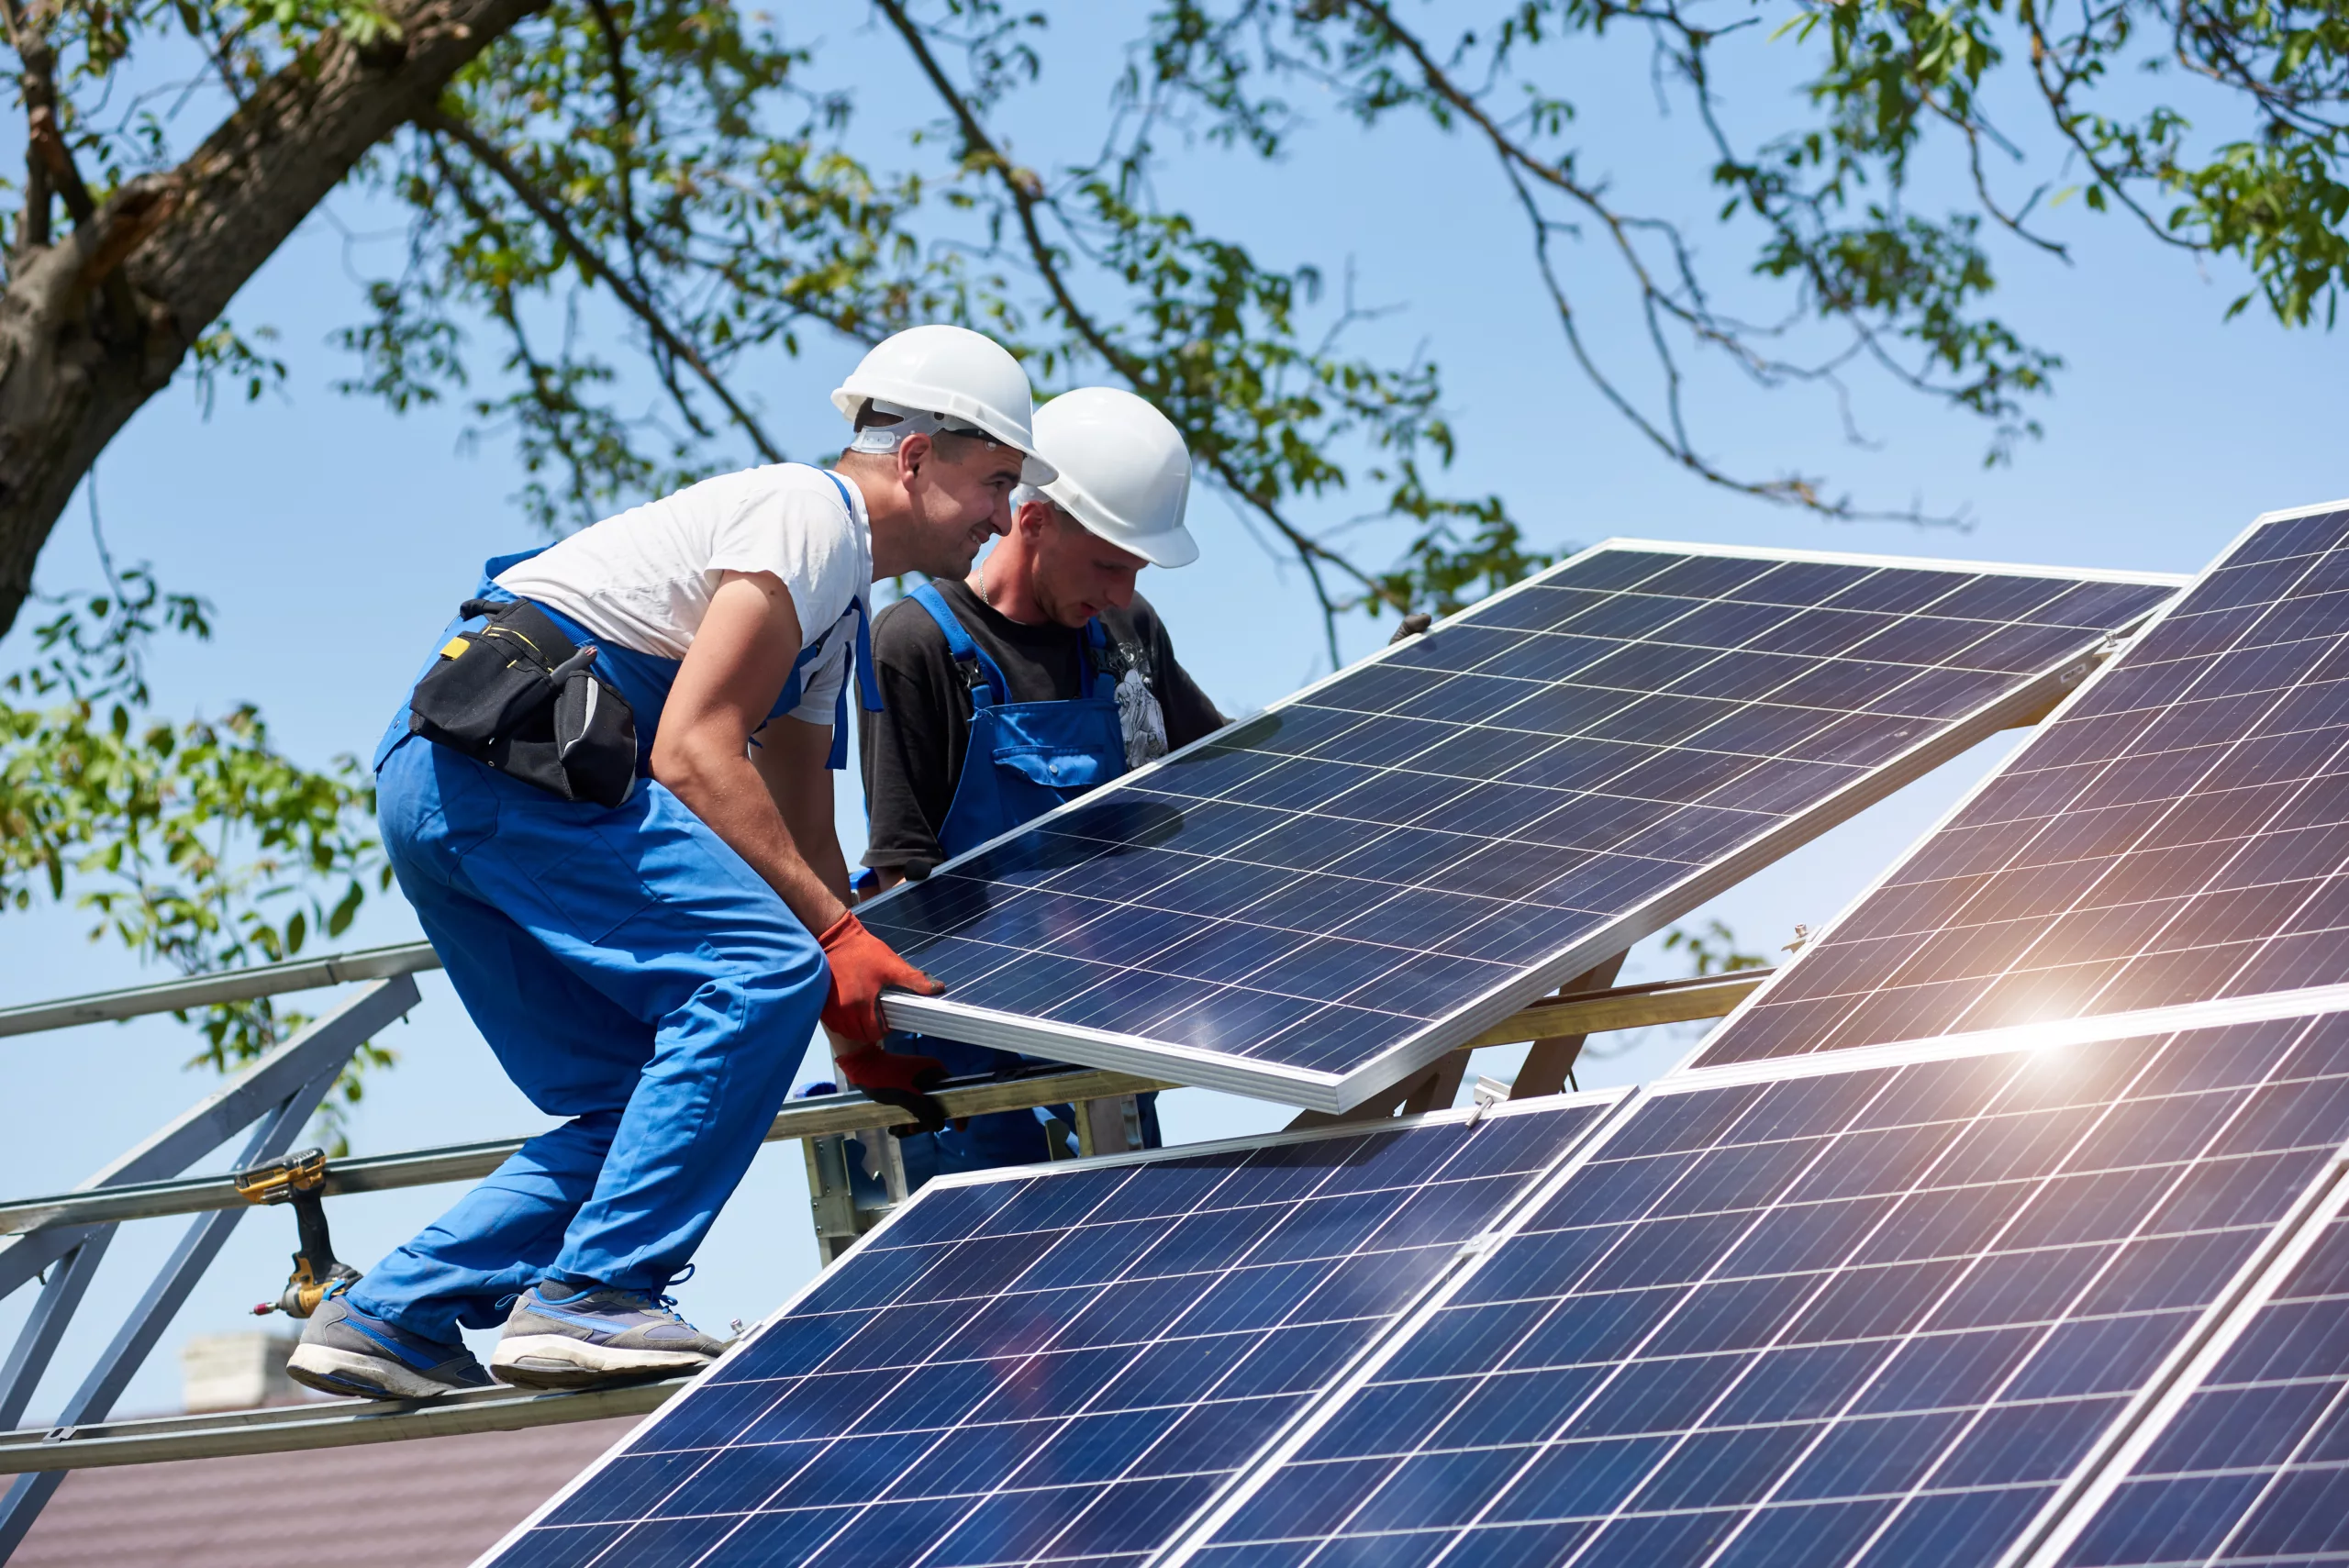 Two young technicians installing heavy solar photo voltaic panels on a multifamily property.